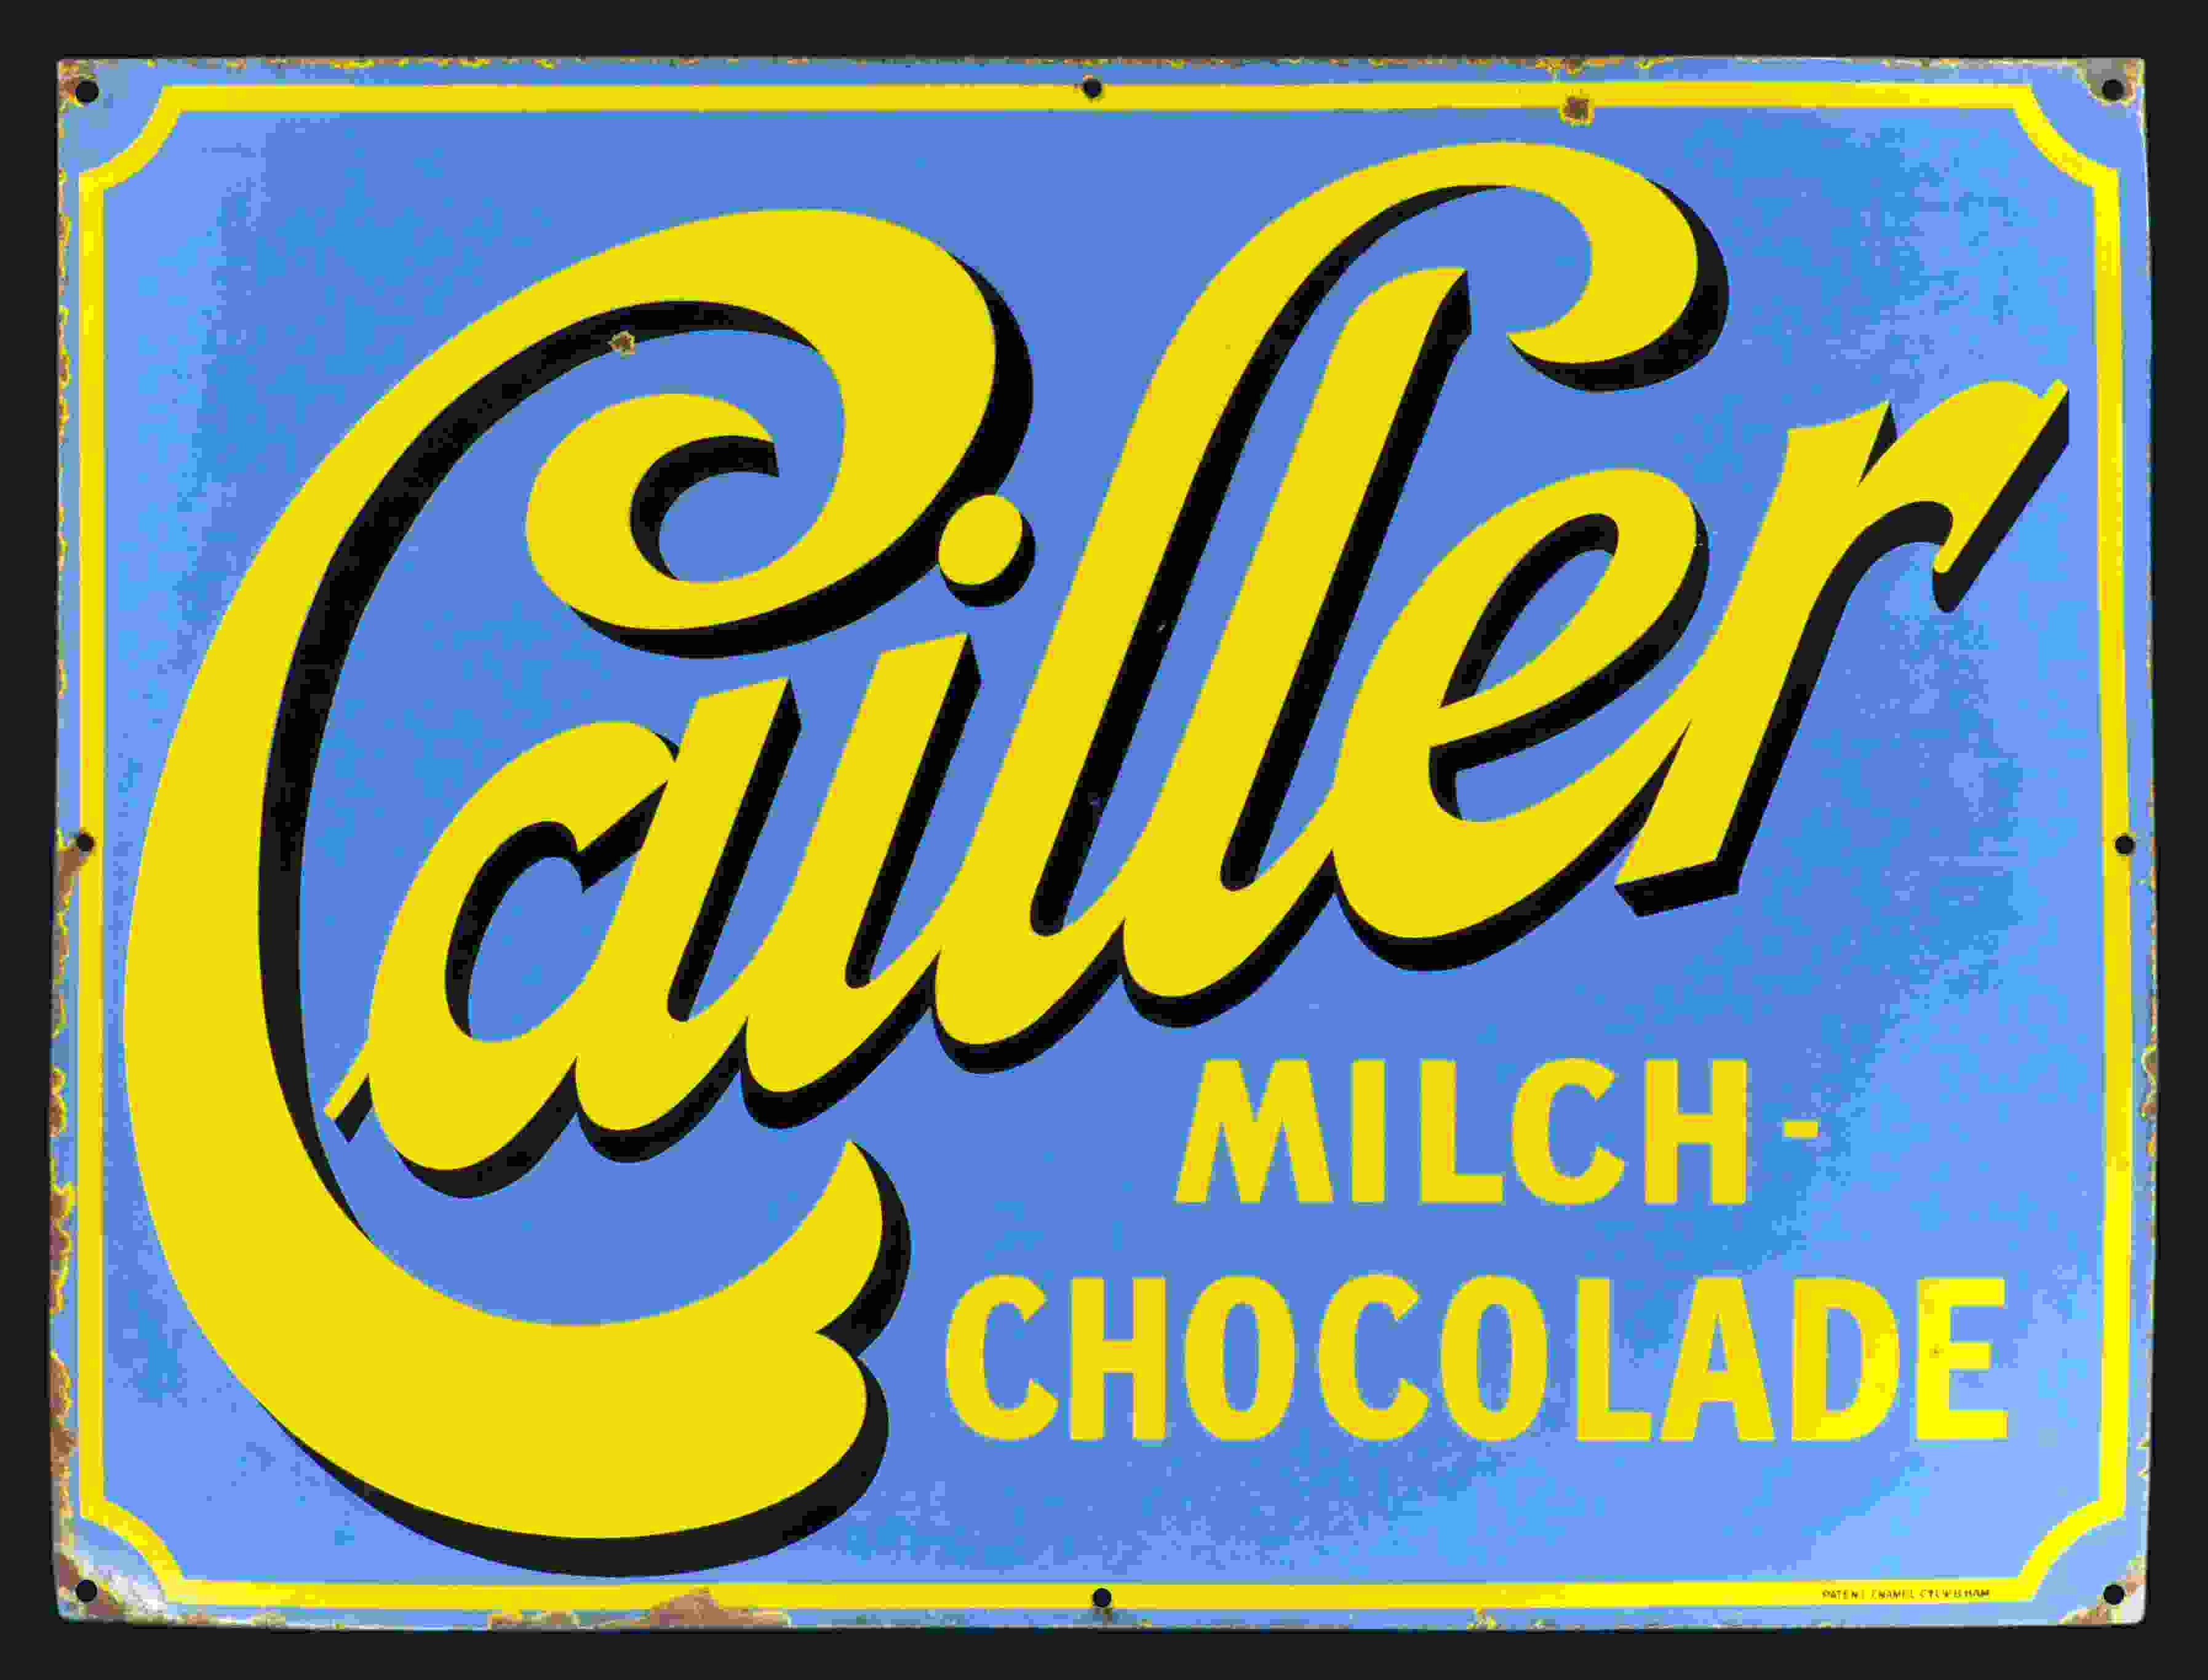 Cailler Milch-Chocolade 